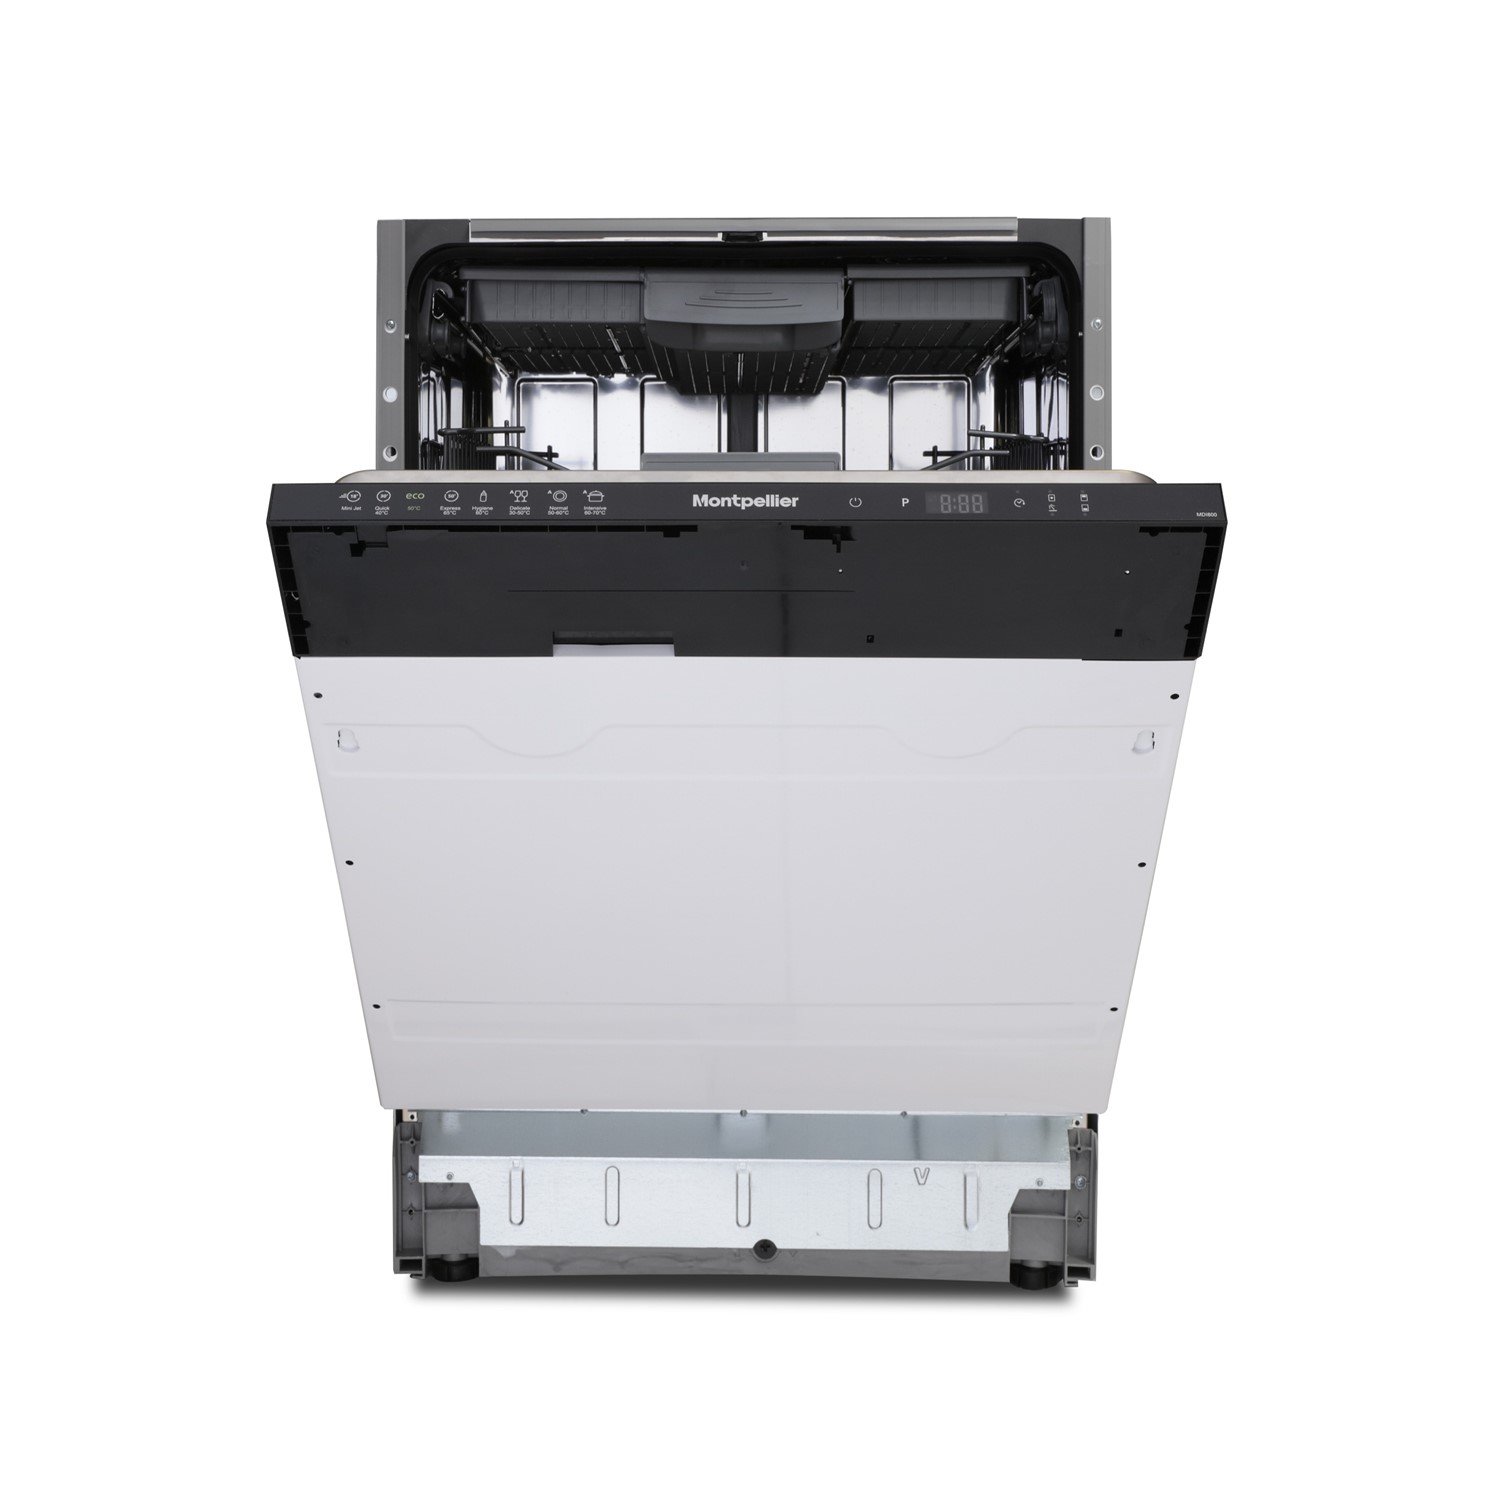 Refurbished Montpellier MDI805 15 Place Fully Integrated Dishwasher